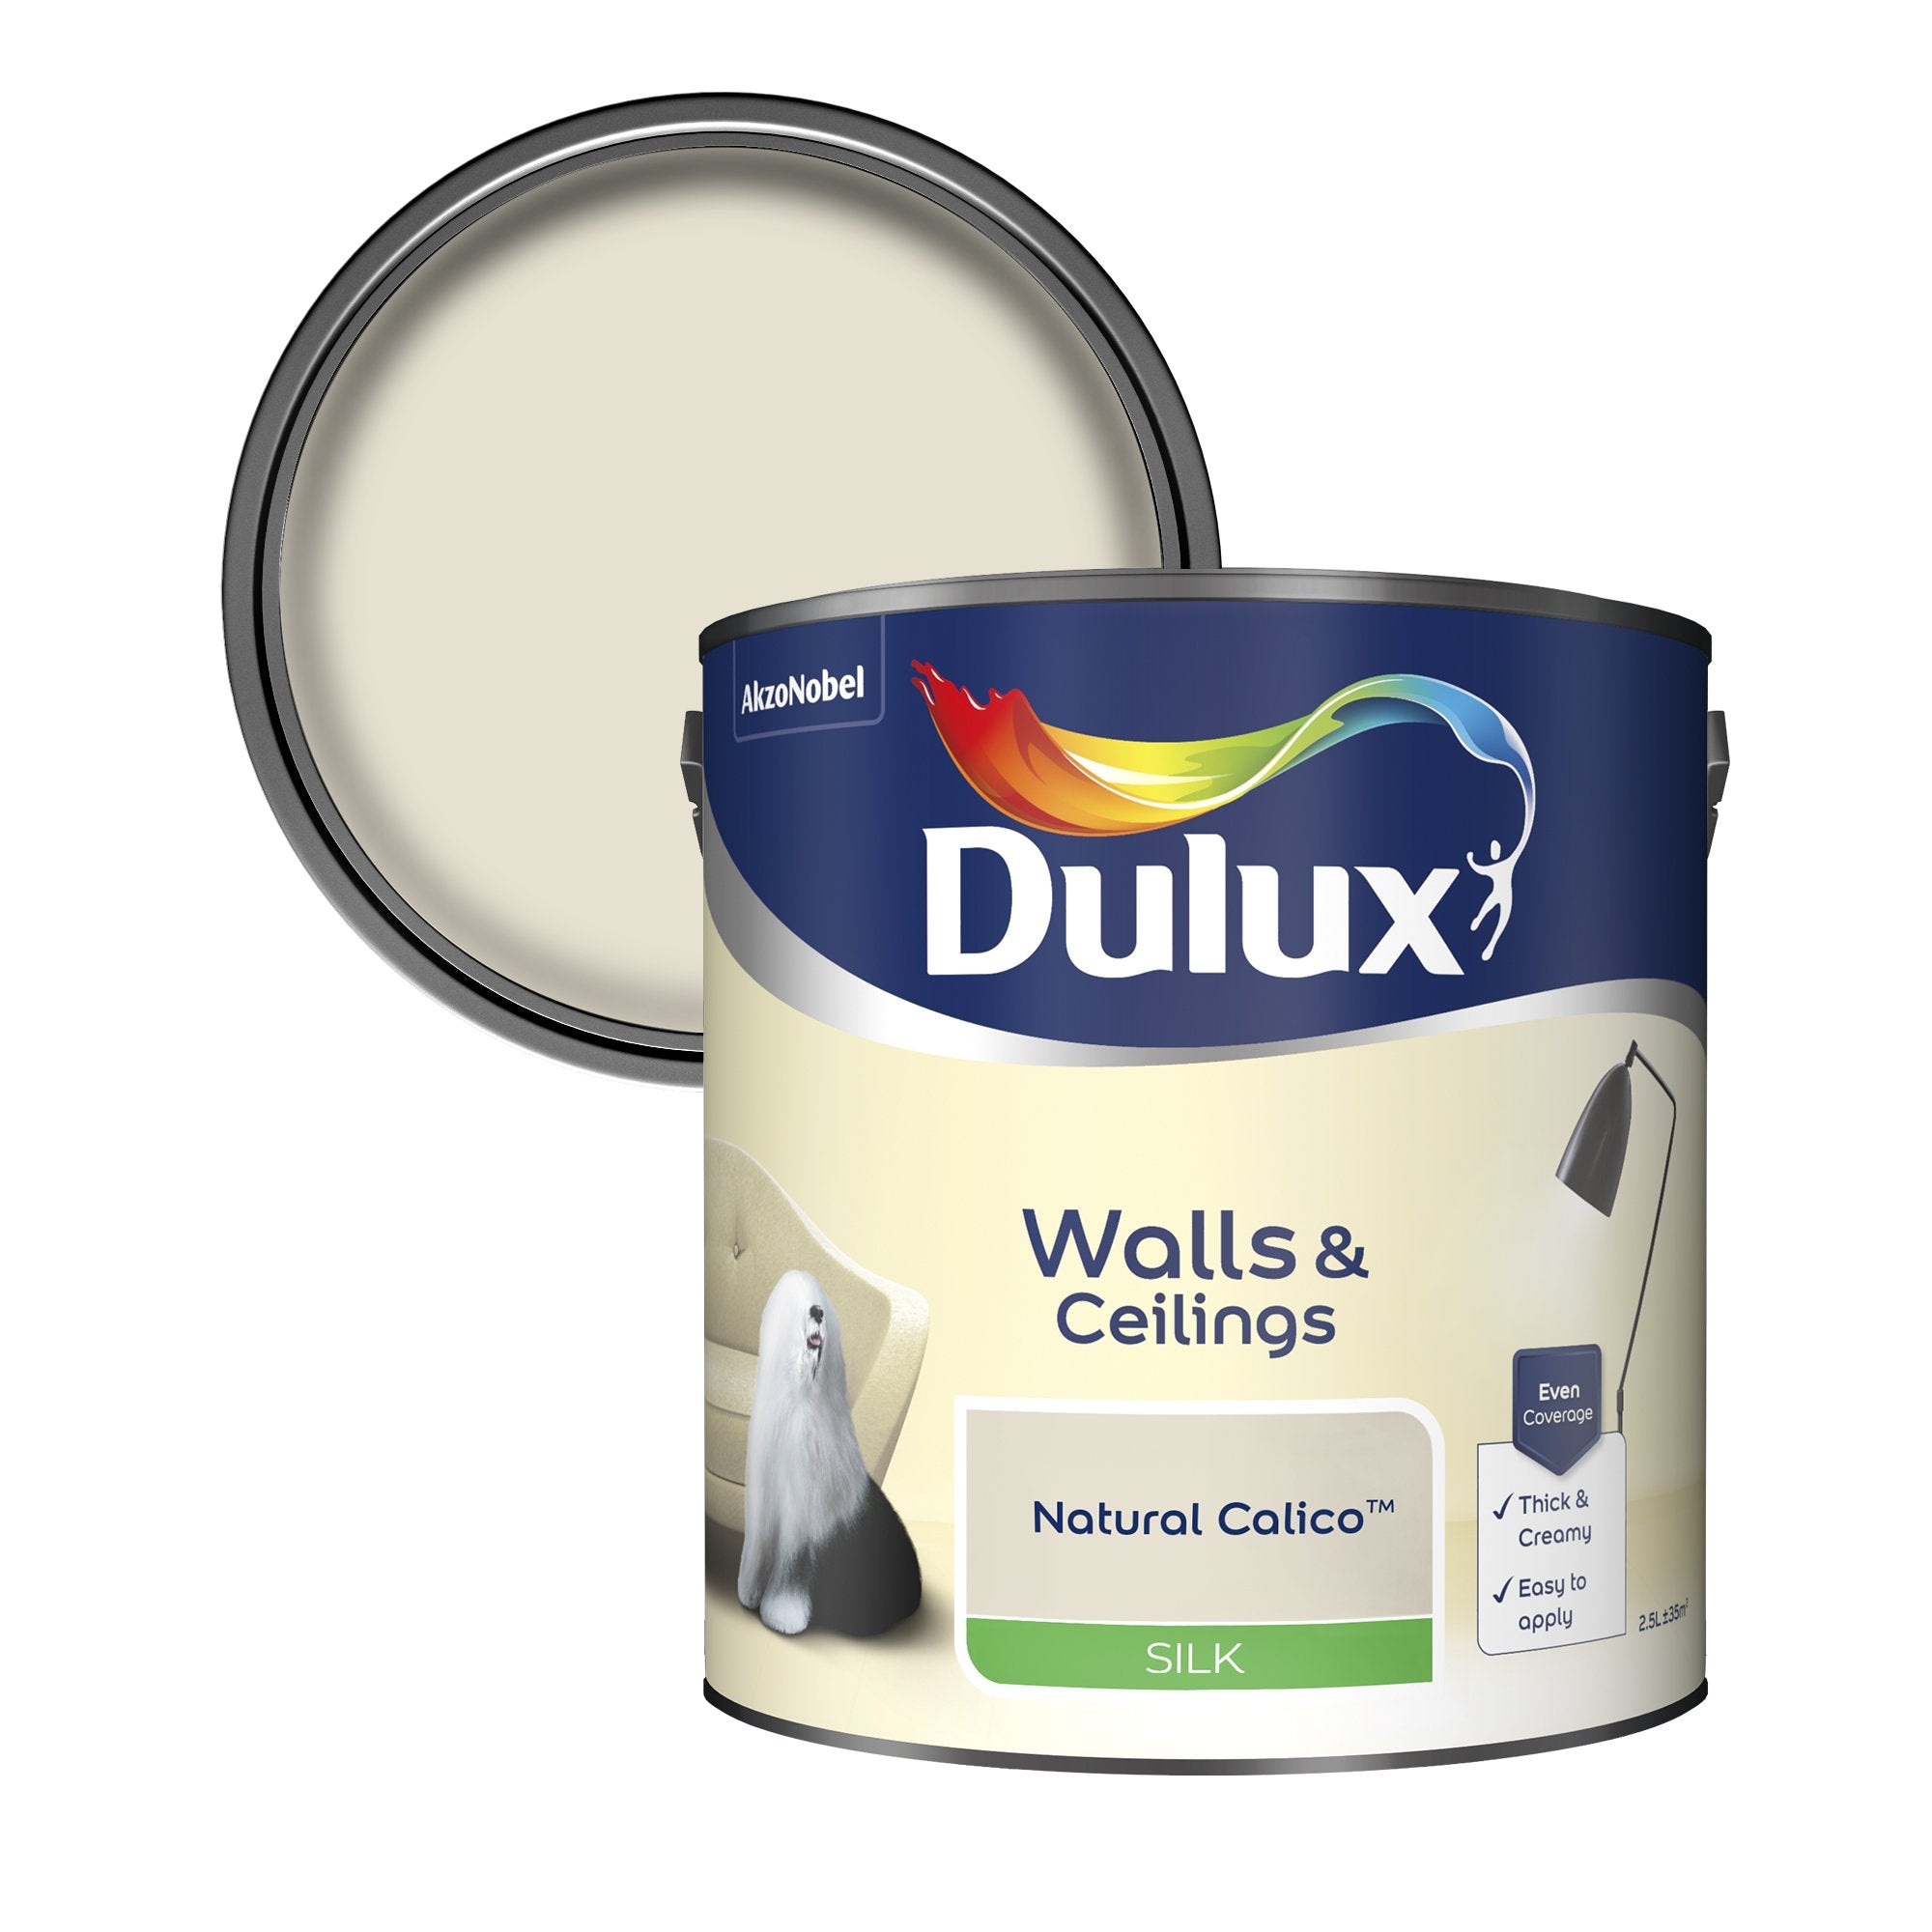 Dulux-Silk-Emulsion-Paint-For-Walls-And-Ceilings-Natural-Calico-2.5L